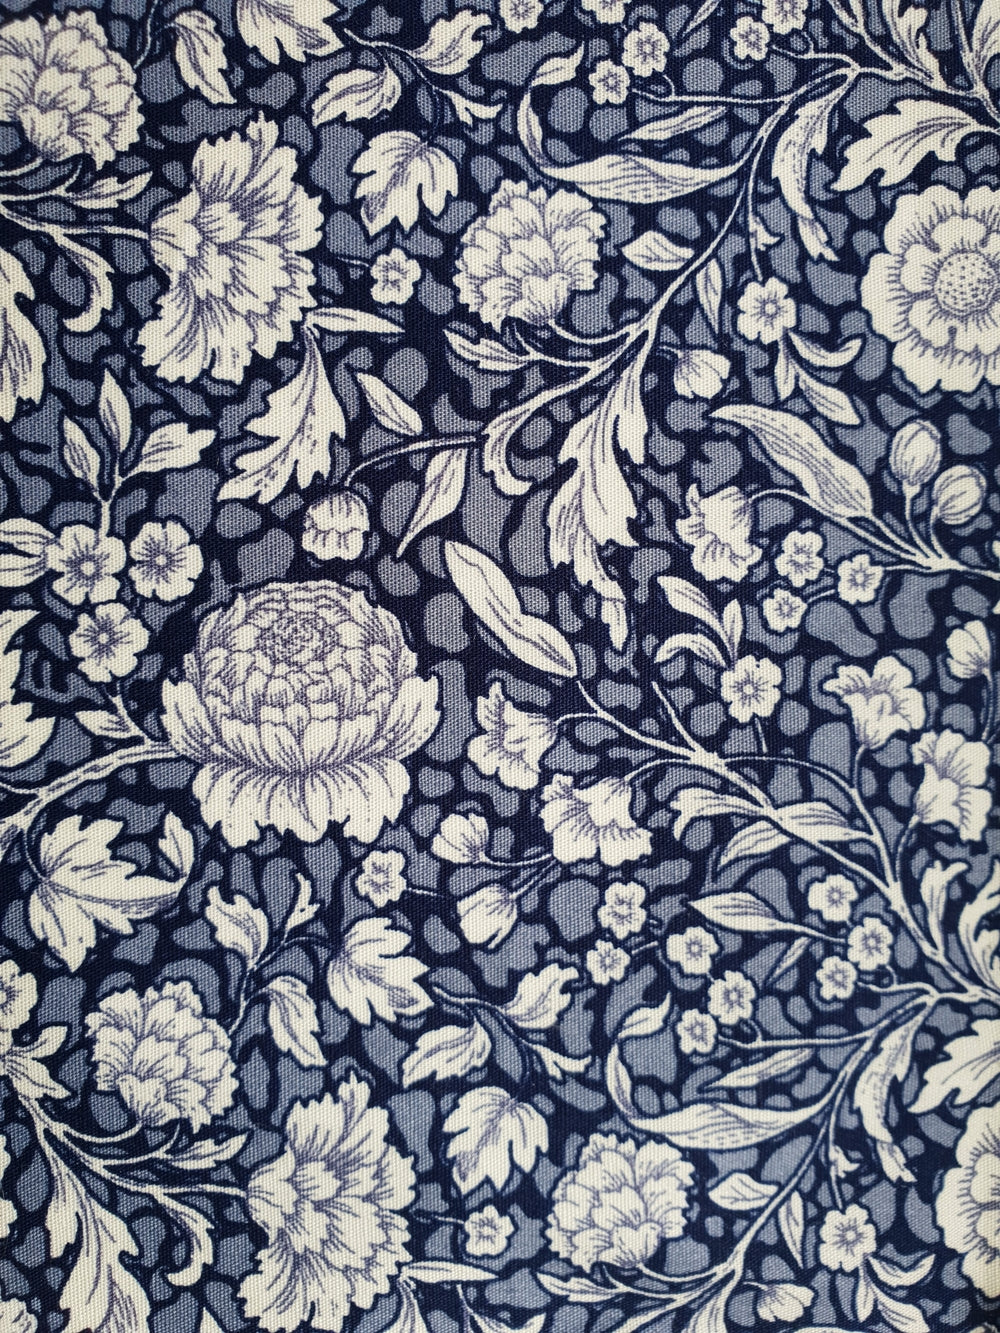 Classic Etched Floral Eiderdown sample 